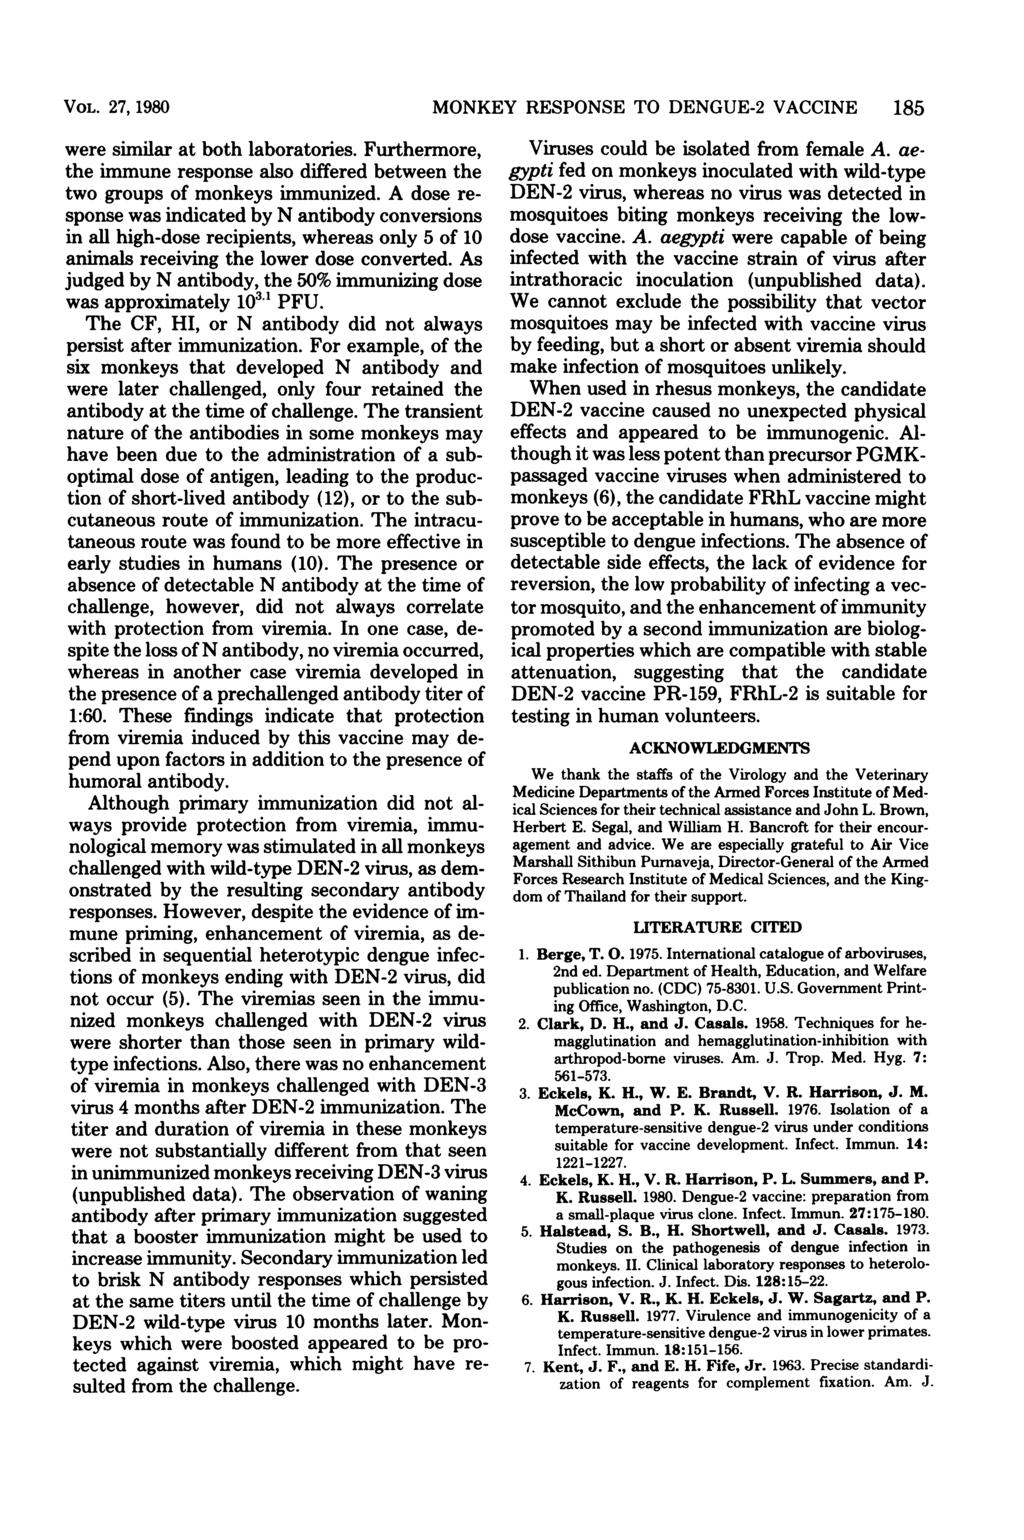 VOL. 27, 1980 were similar at both laboratories. Furthermore, the immune response also differed between the two groups of monkeys immunized.